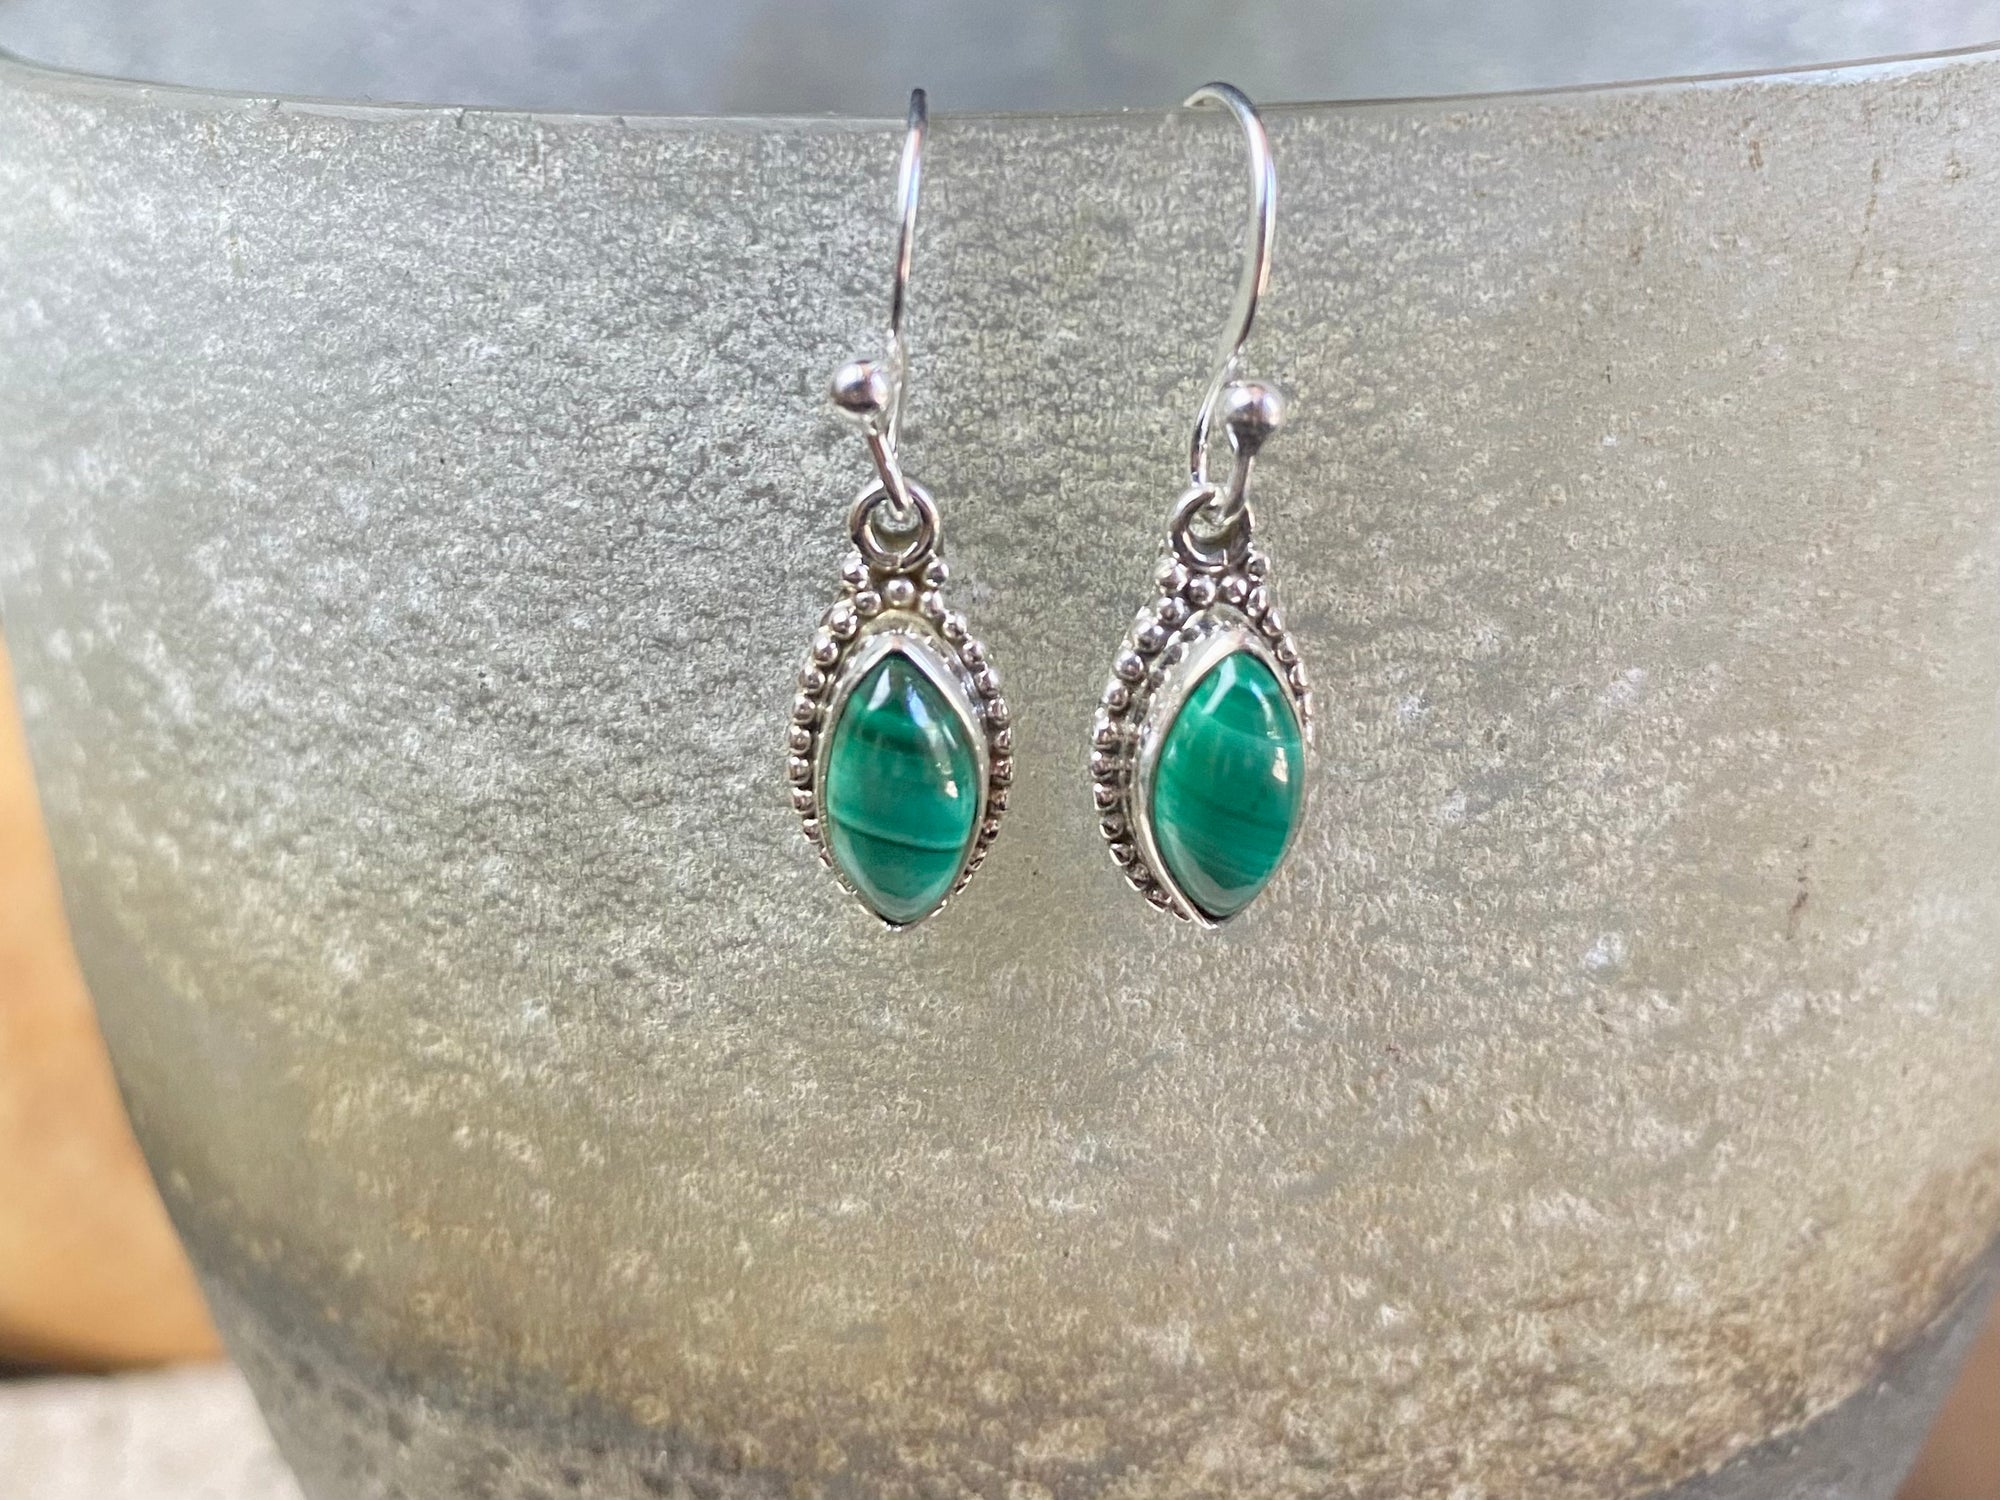 Simply elegant leaf shaped earrings with a beautifully detailed bezel to show off the natural beauty of the cabochon stones. Sterling silver hooks complete the look. Our earrings are open-backed to allow natural light to show through. Length including hook 2.7 cm